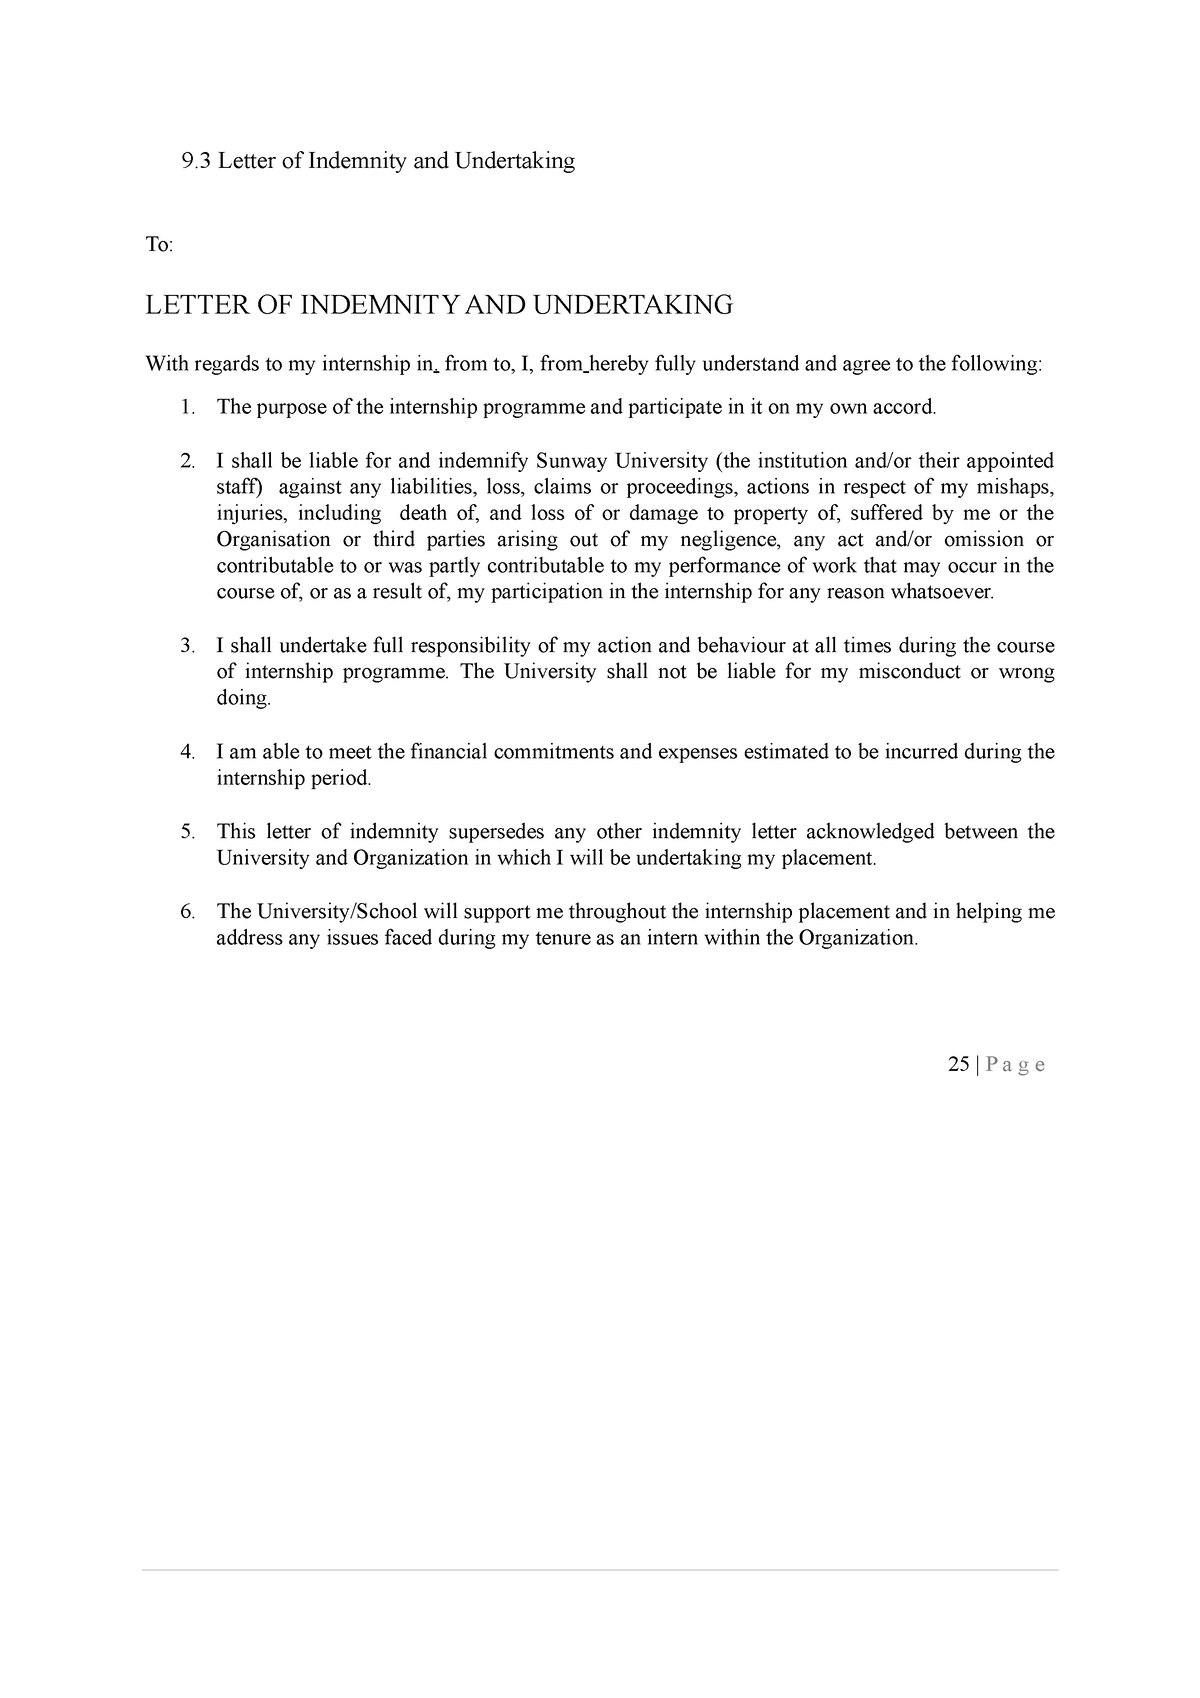 Letter Of Indemnity 0 Undertaking 2022 9 Letter Of Indemnity And Undertaking To Letter Of 6381